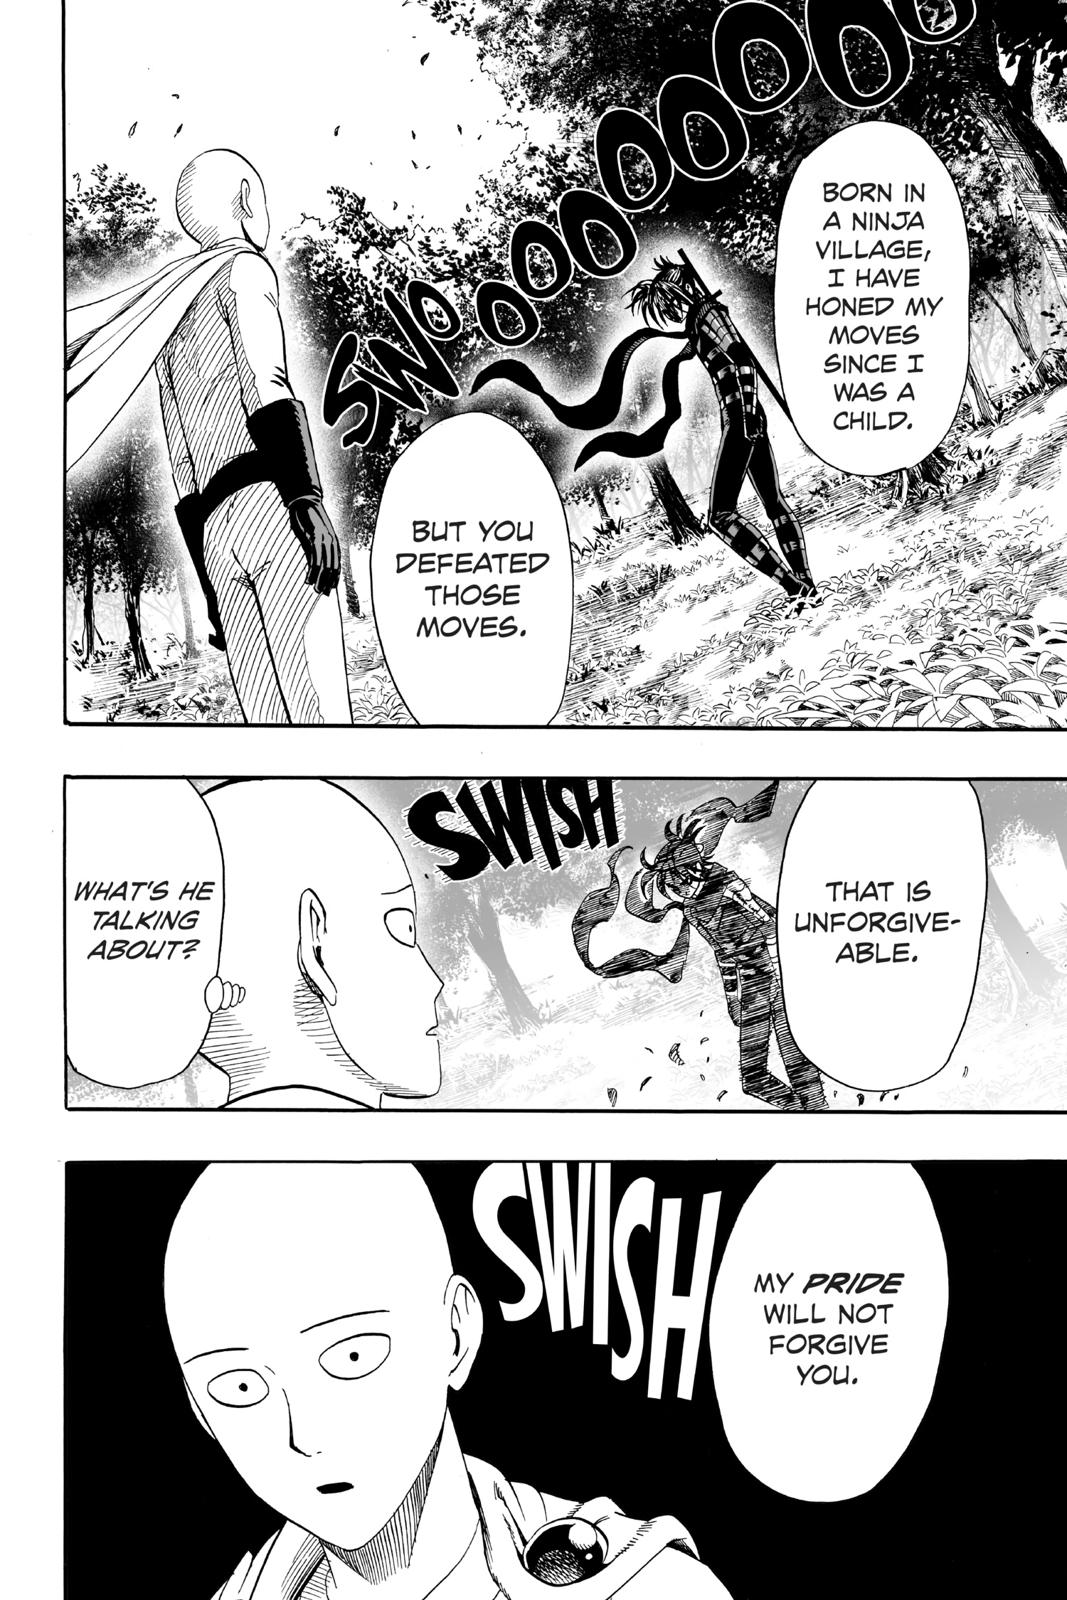 One-Punch Man, Punch 14 image 18